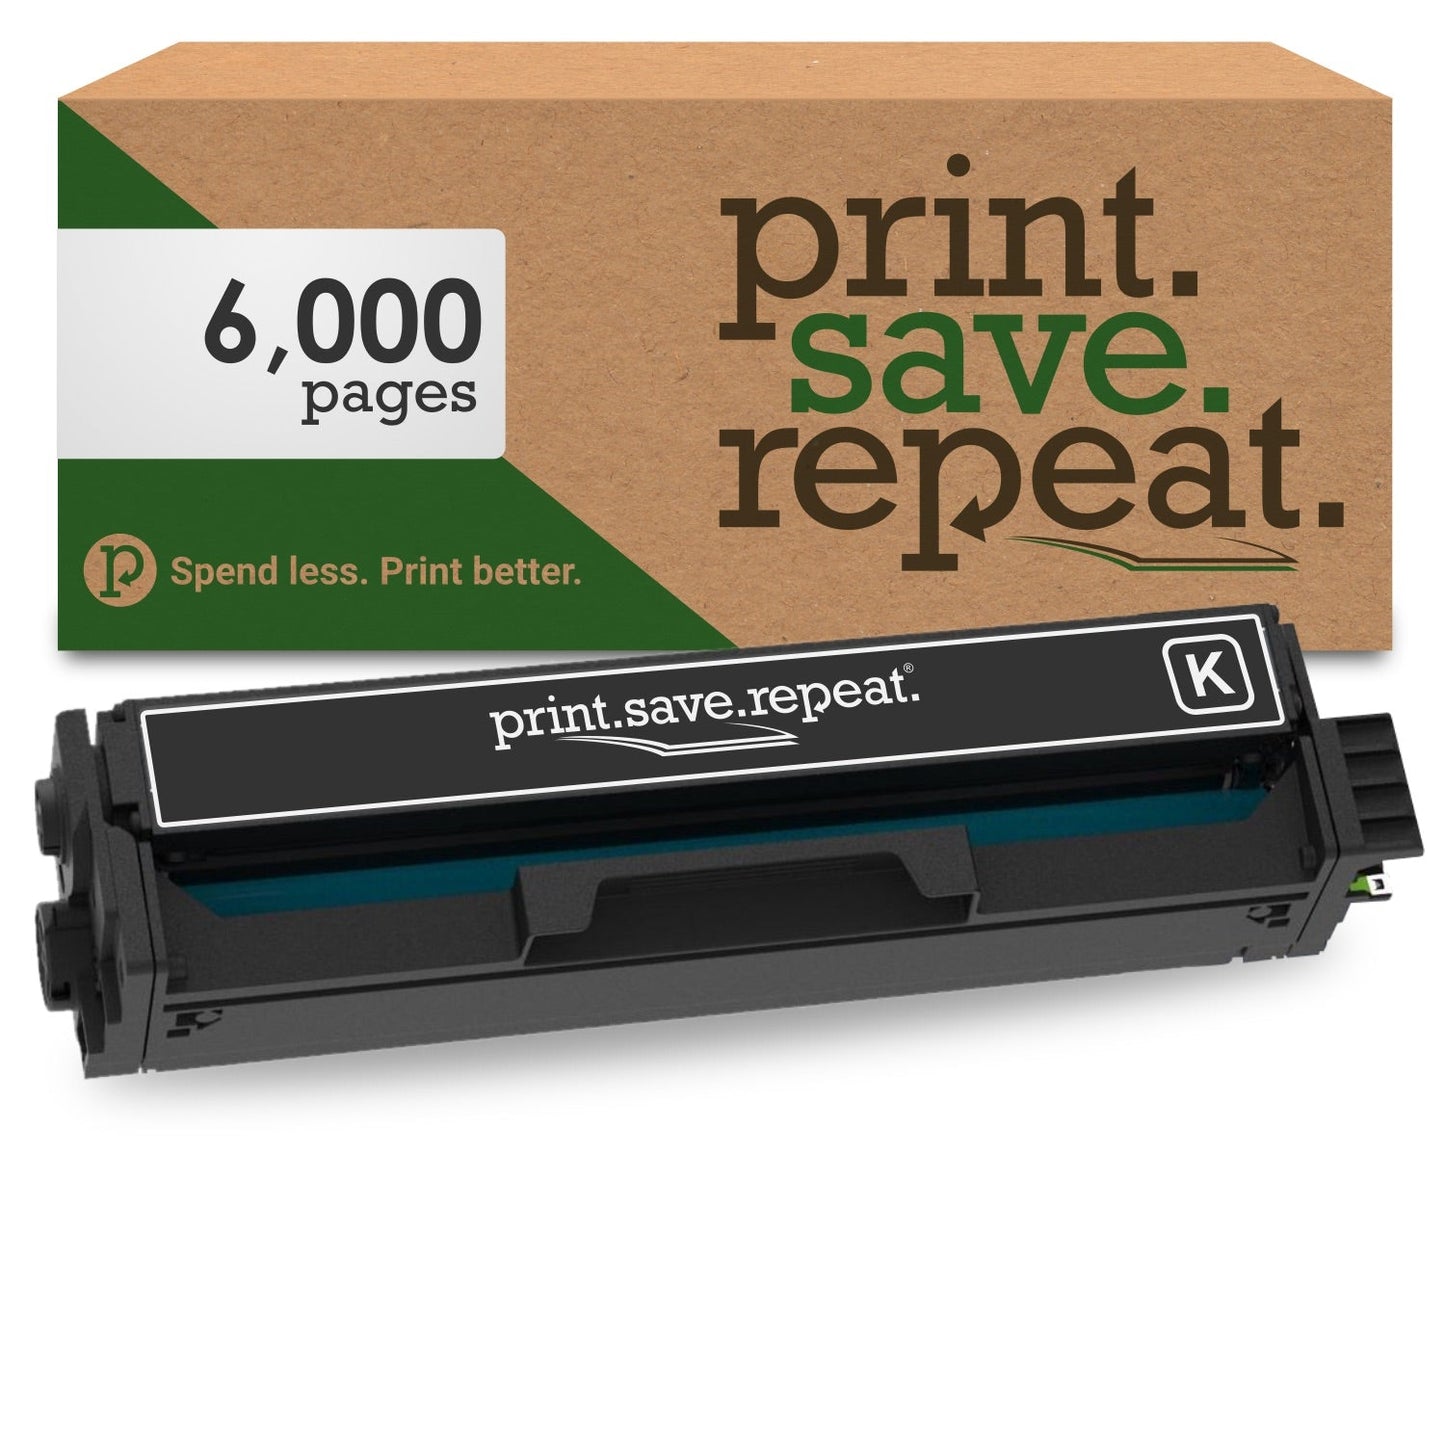 Print.Save.Repeat. Lexmark 20N1XK0 Black Extra High Yield Remanufactured Toner Cartridge for CS431, CX431 [6,000 Pages]